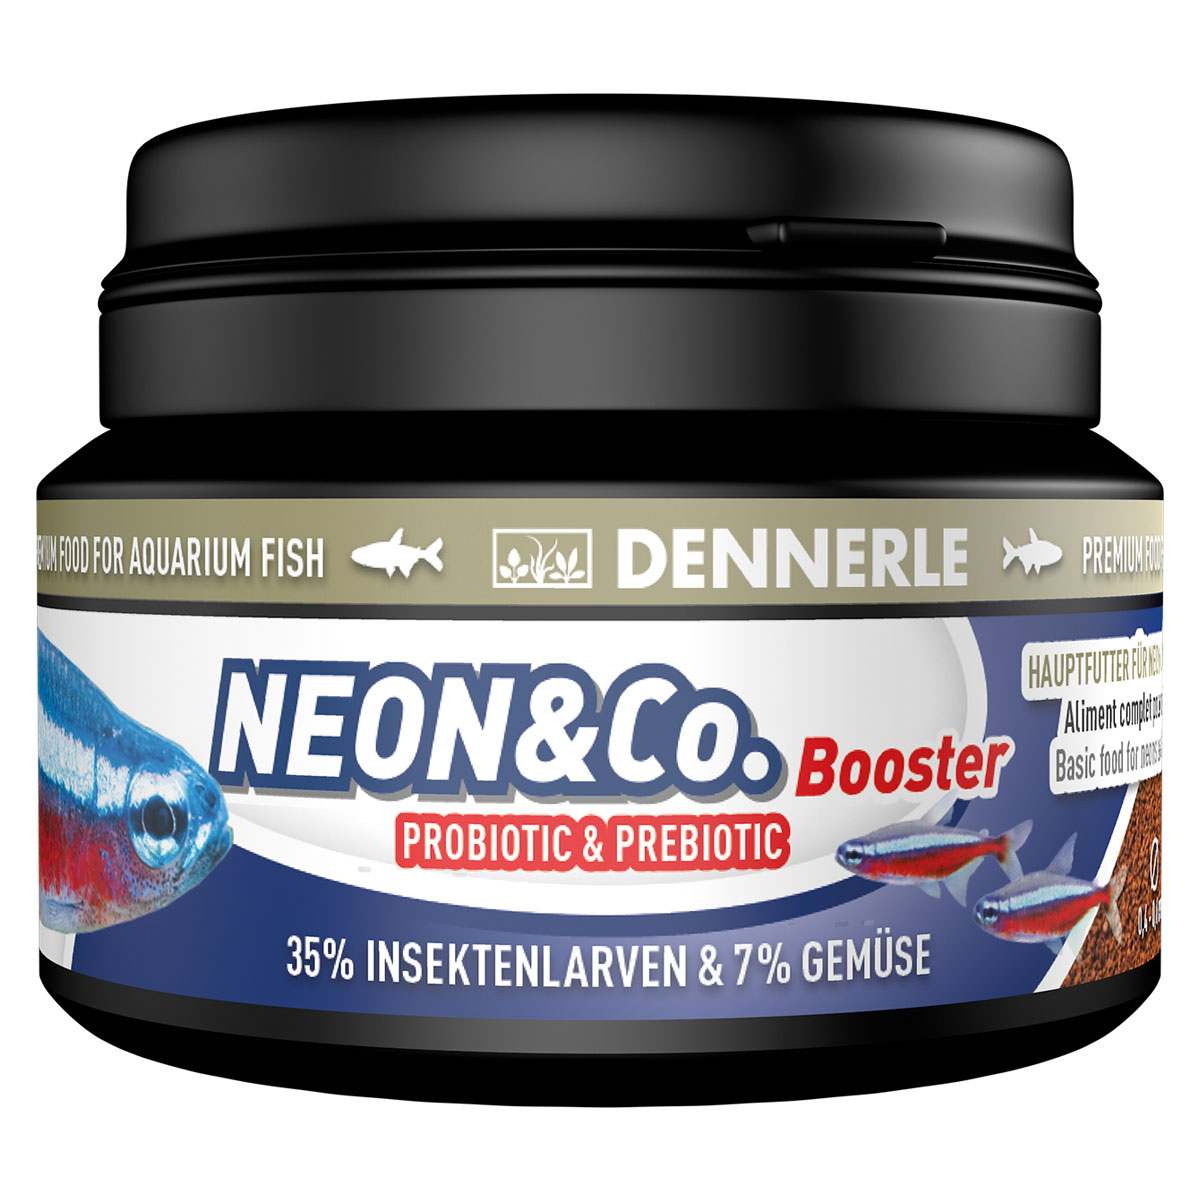 Dennerle Neon & Co Booster 100 ml